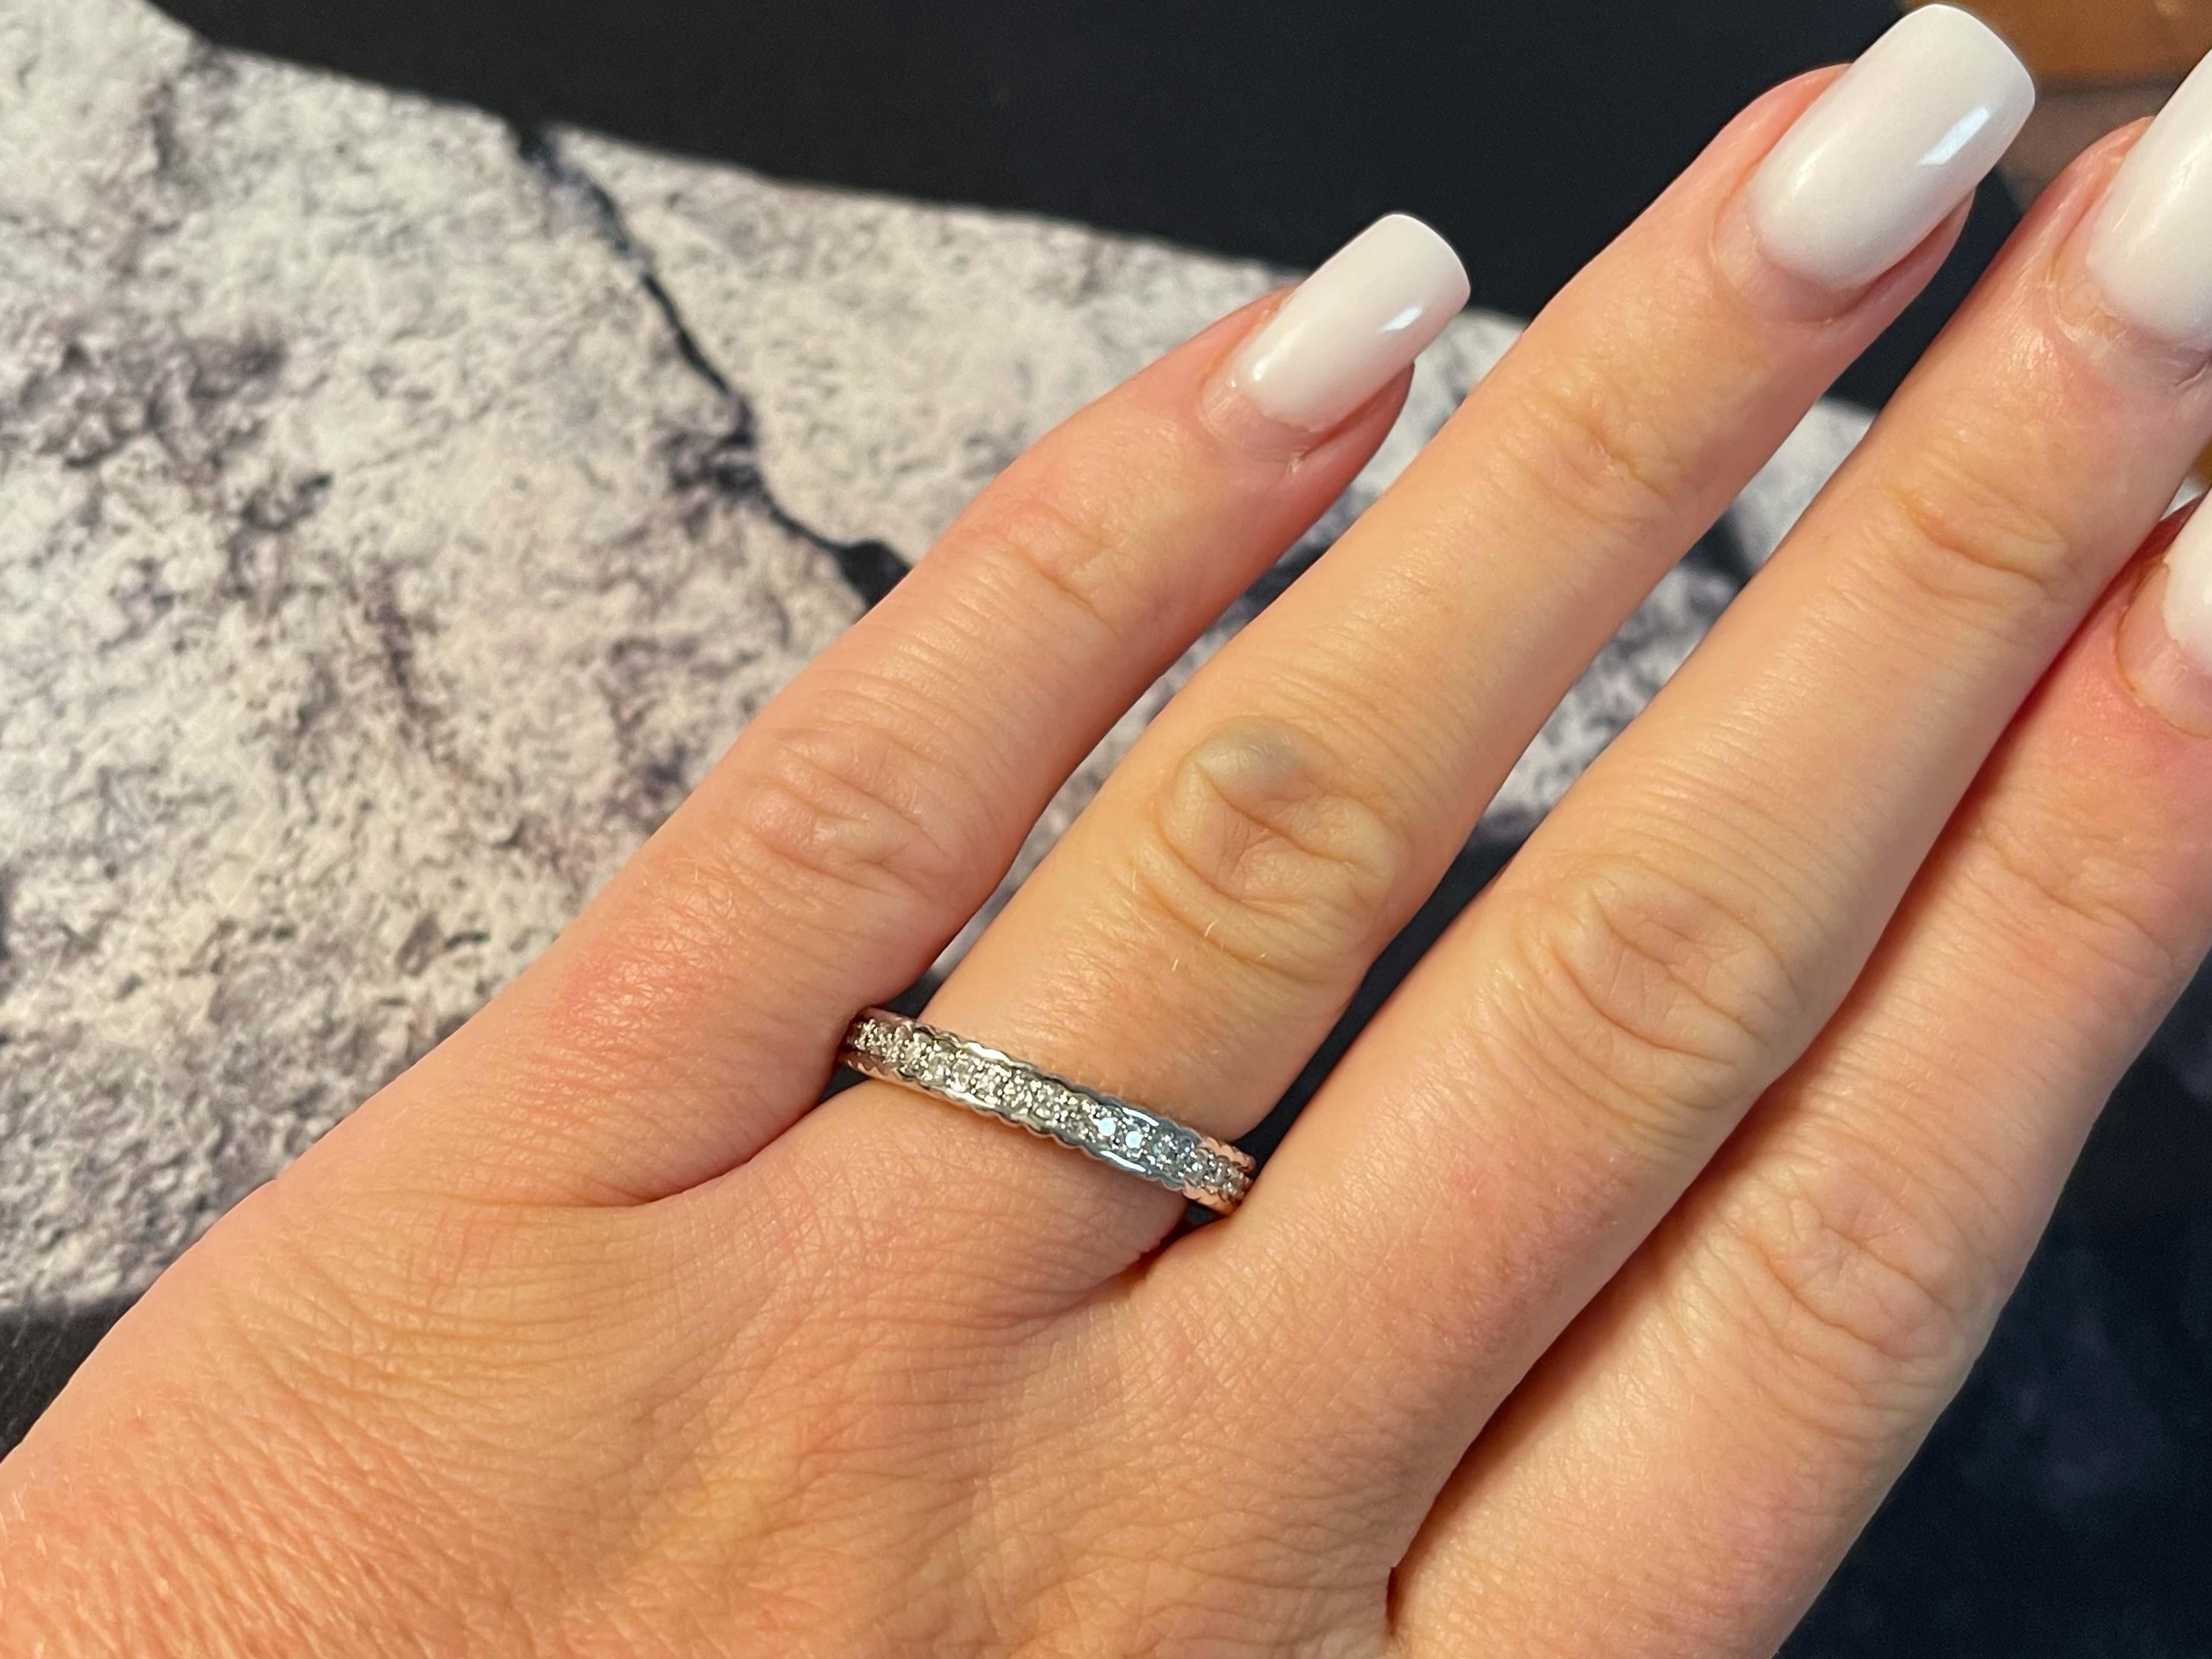 Item Specifications:

Metal: 18k White Gold

Diamond Count: 46 brilliant cut

Total Diamond Carat Weight: 0.55 carats 

Diamond Color: G-H

Diamond Clarity: SI

Ring Size: 6.5

Total Weight: 5.2 Grams

Stamped: 